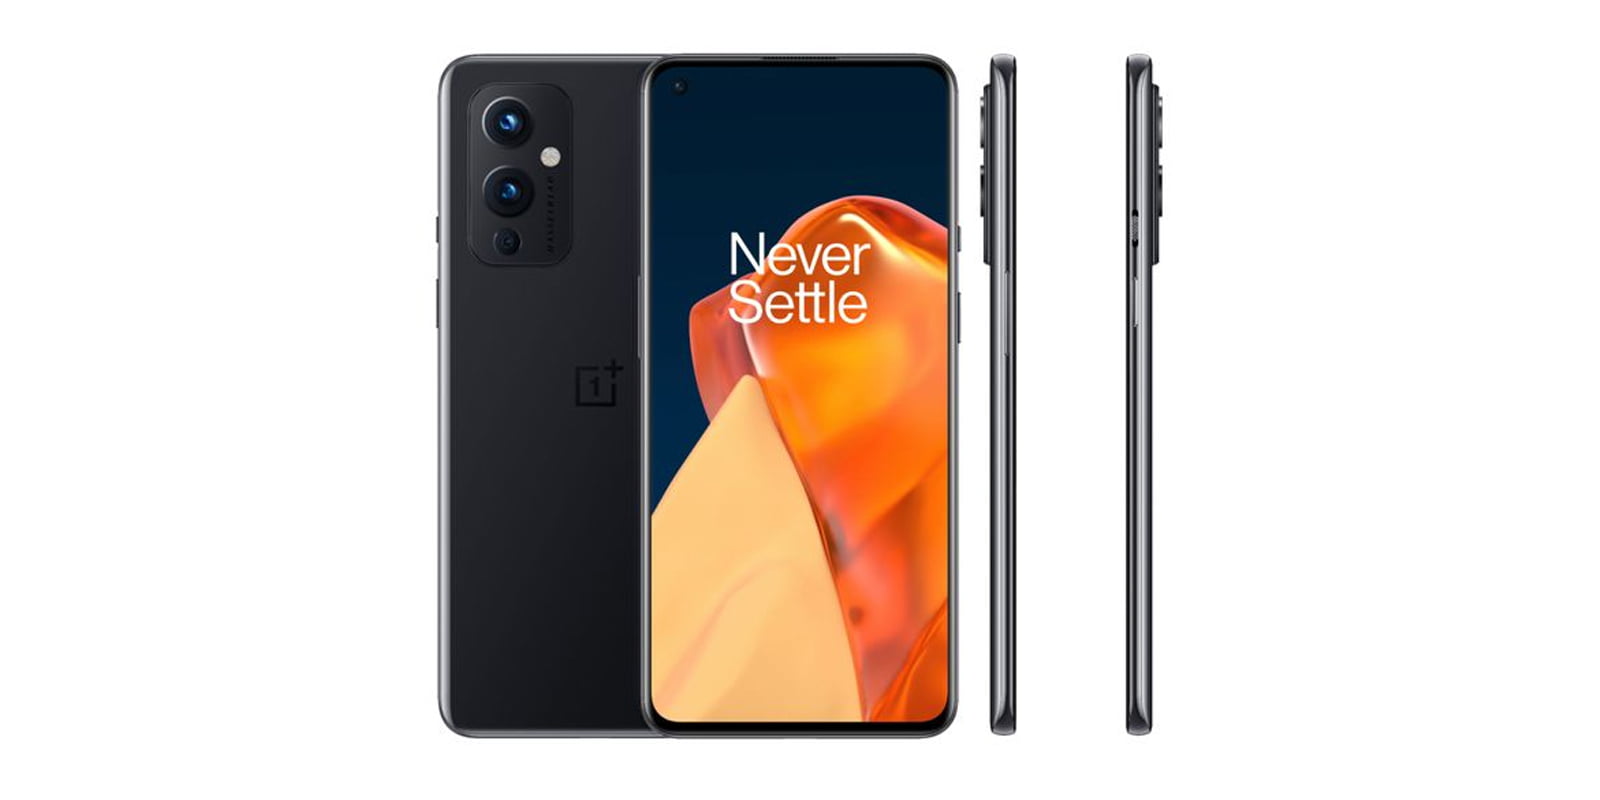 What To Expect From The Oneplus 9 Launch Event